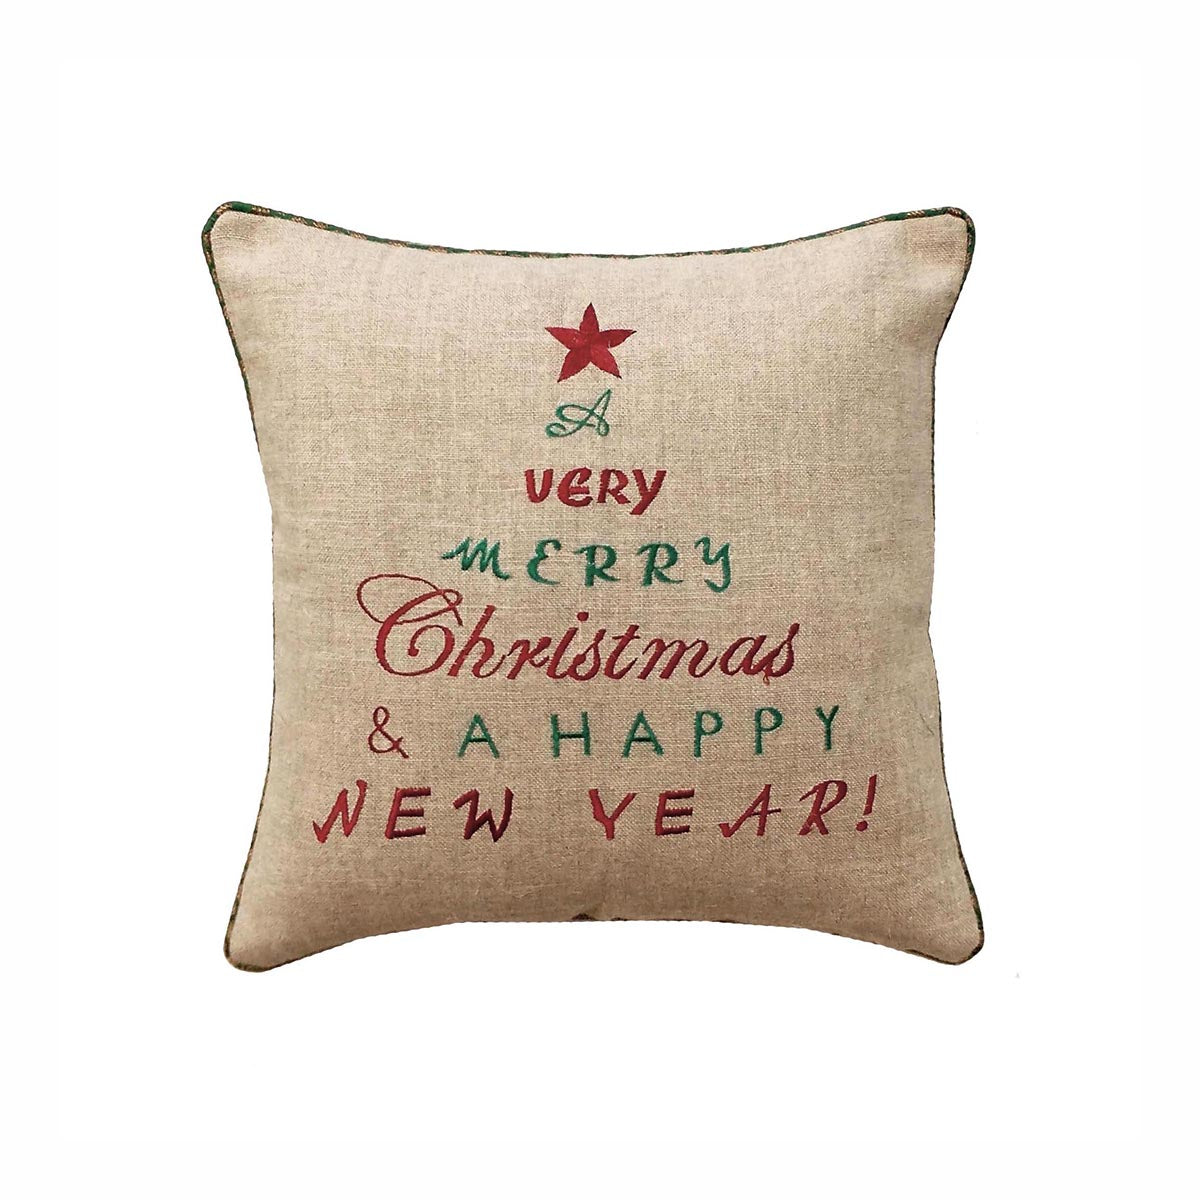 Christmas Happy new year cushion cover,linen pillow cover